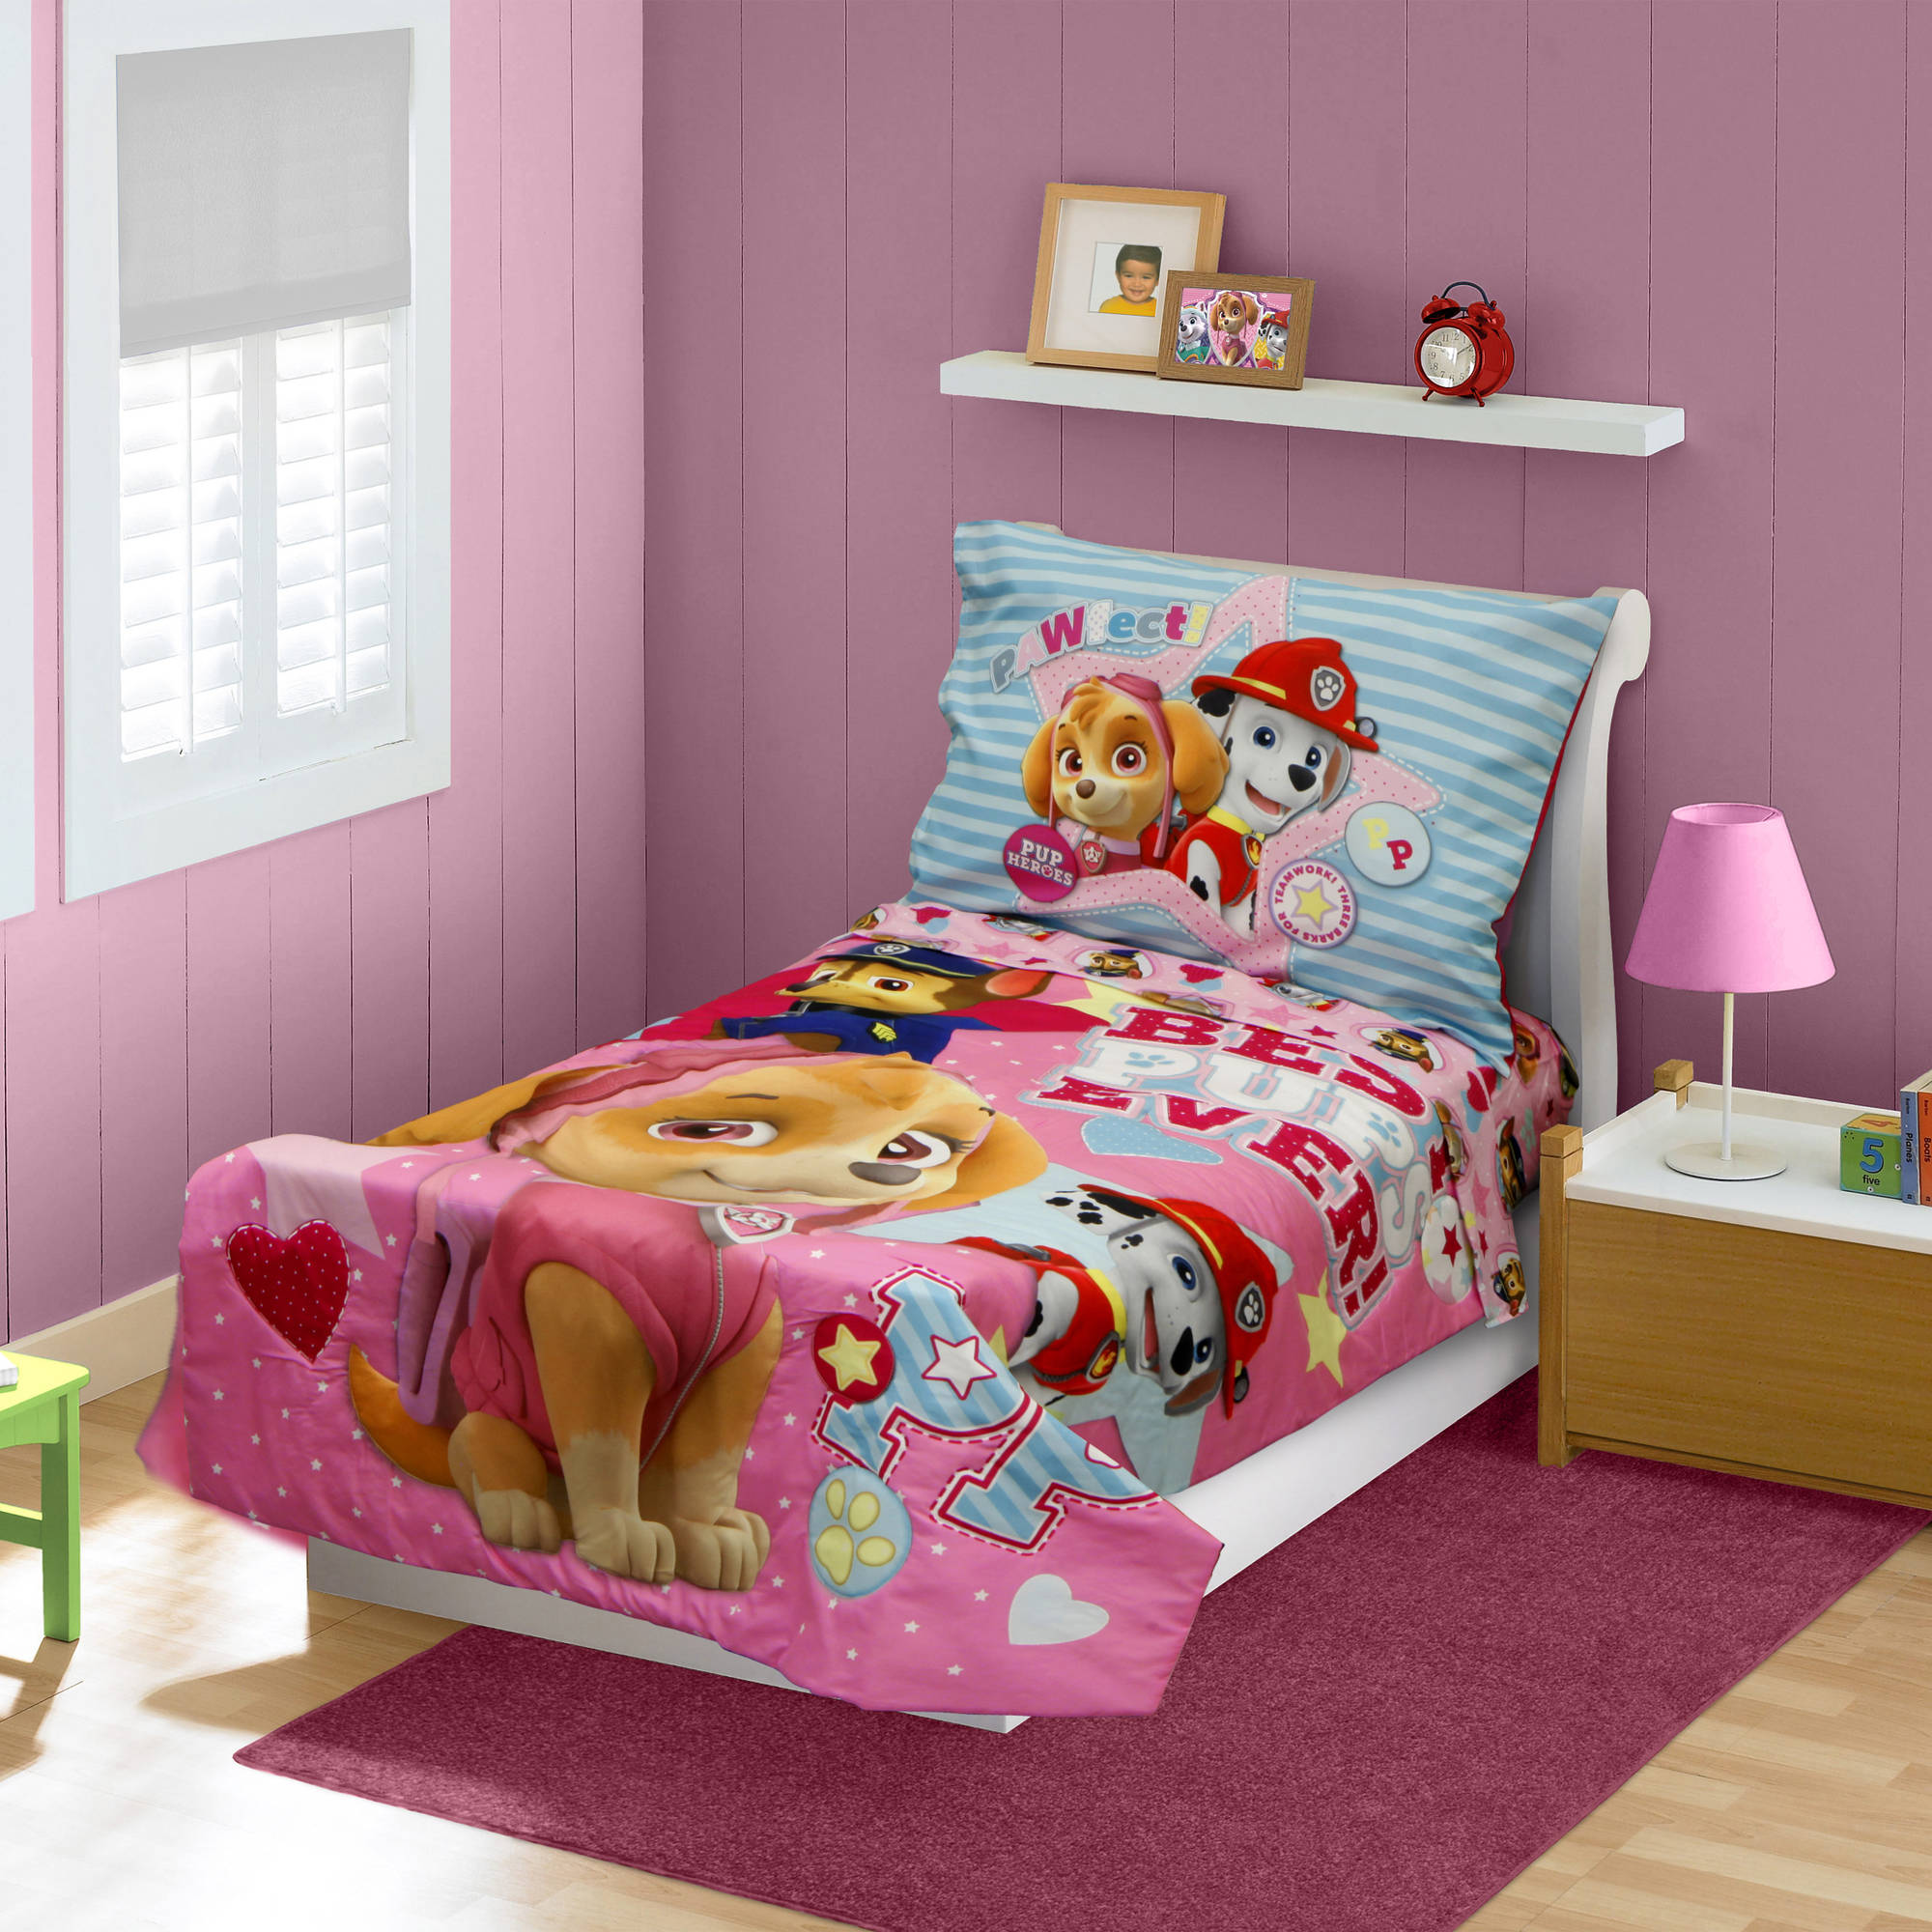 Show your love through toddler bedding sets